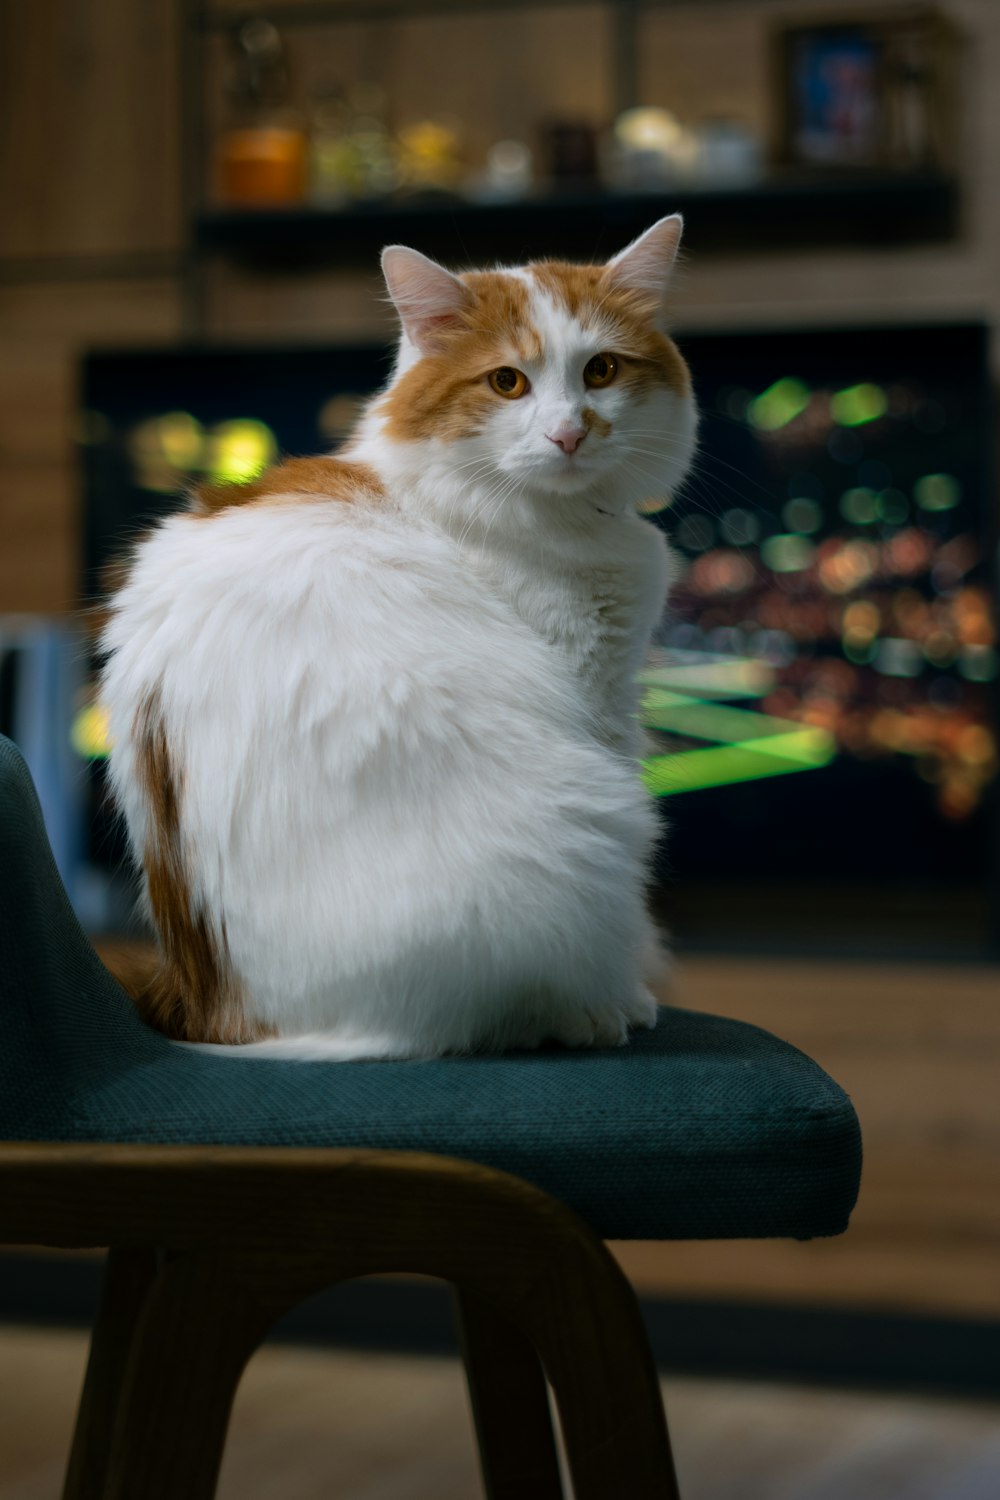 a cat sitting on a chair in front of a television